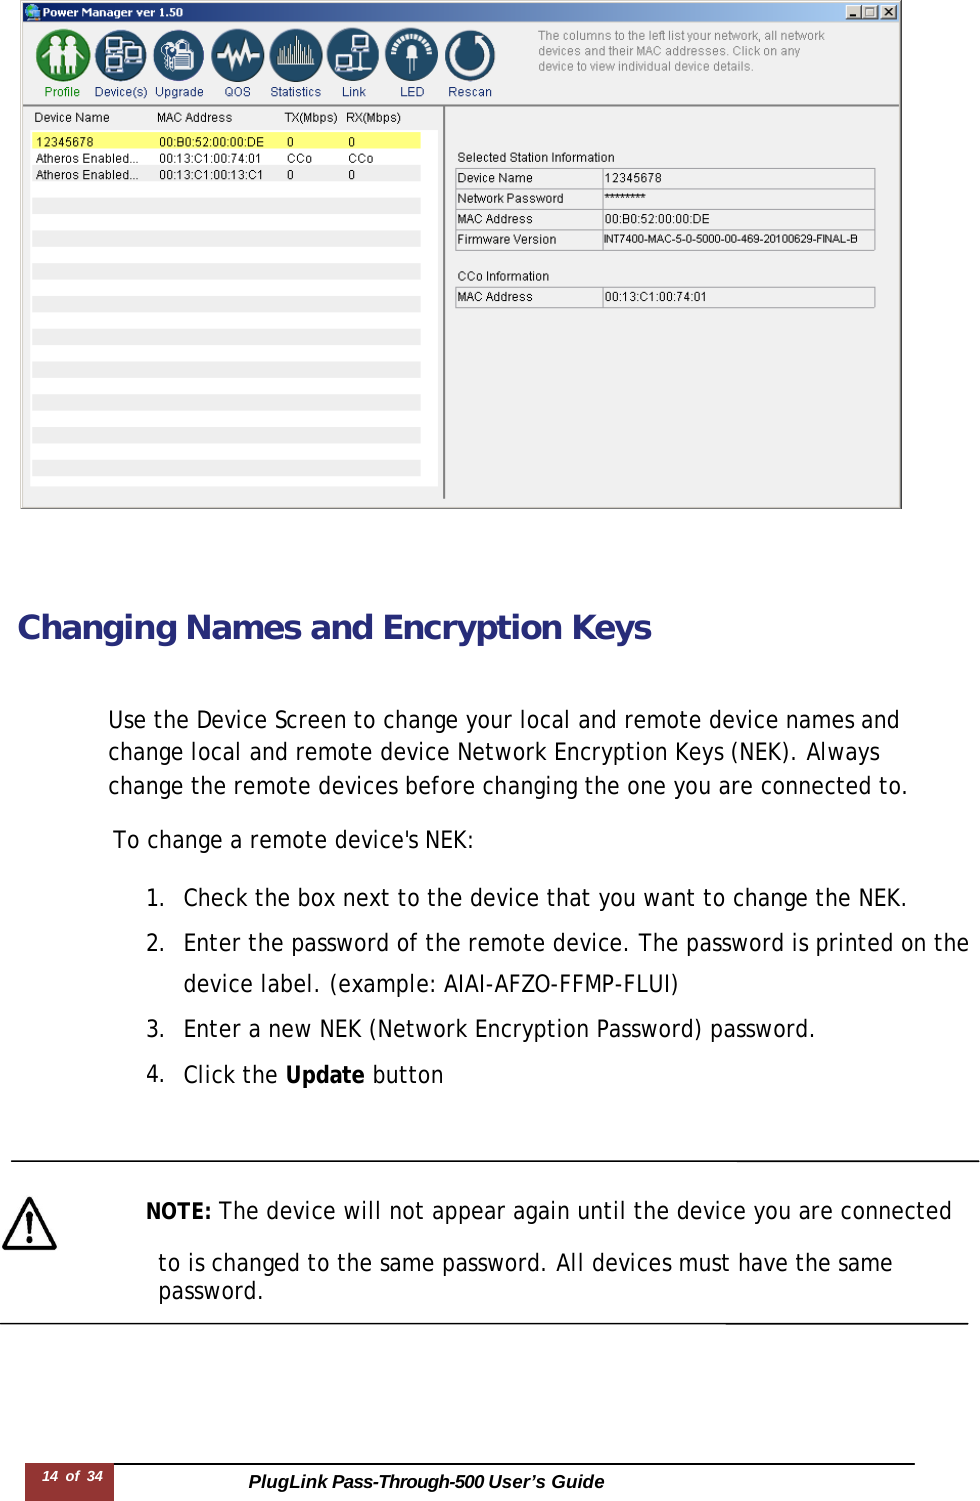 PlugLink Pass-Through-500 User’s Guide 14 of 34           Changing Names and Encryption Keys    Use the Device Screen to change your local and remote device names and change local and remote device Network Encryption Keys (NEK). Always change the remote devices before changing the one you are connected to.  To change a remote device&apos;s NEK:  1. Check the box next to the device that you want to change the NEK. 2. Enter the password of the remote device. The password is printed on the device label. (example: AIAI-AFZO-FFMP-FLUI) 3. Enter a new NEK (Network Encryption Password) password. 4. Click the Update button       NOTE: The device will not appear again until the device you are connected                   to is changed to the same password. All devices must have the same password. 